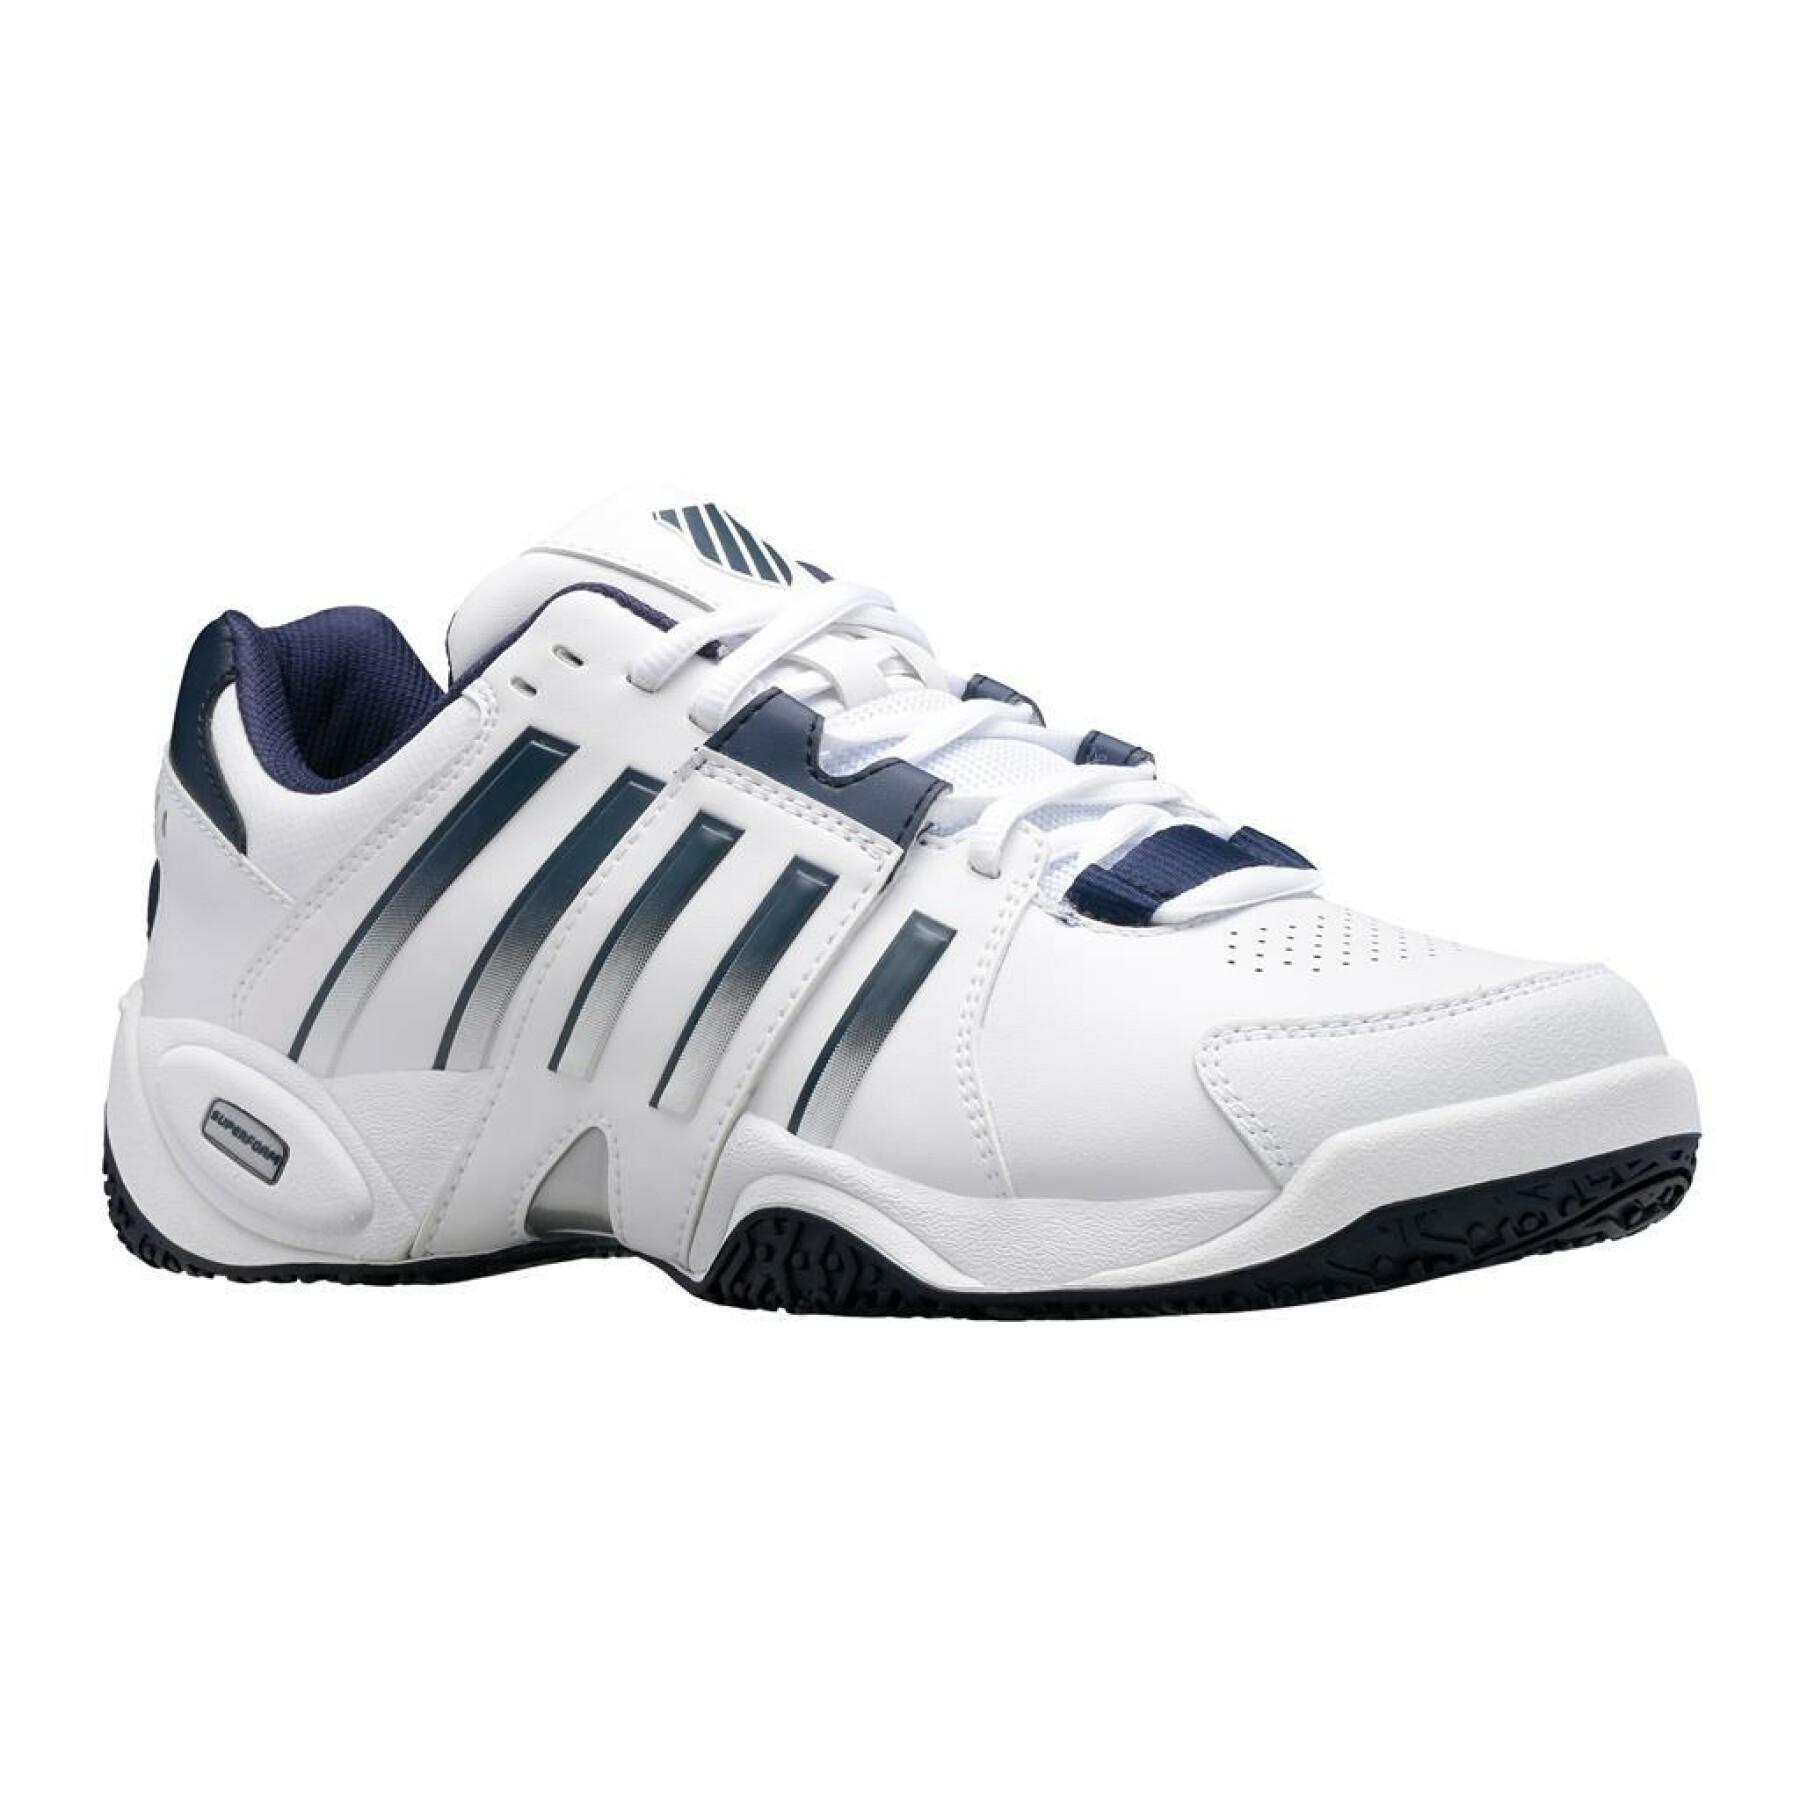 Tennis shoes K-Swiss Accomplish IV Omni - - Other Brands - Shoes